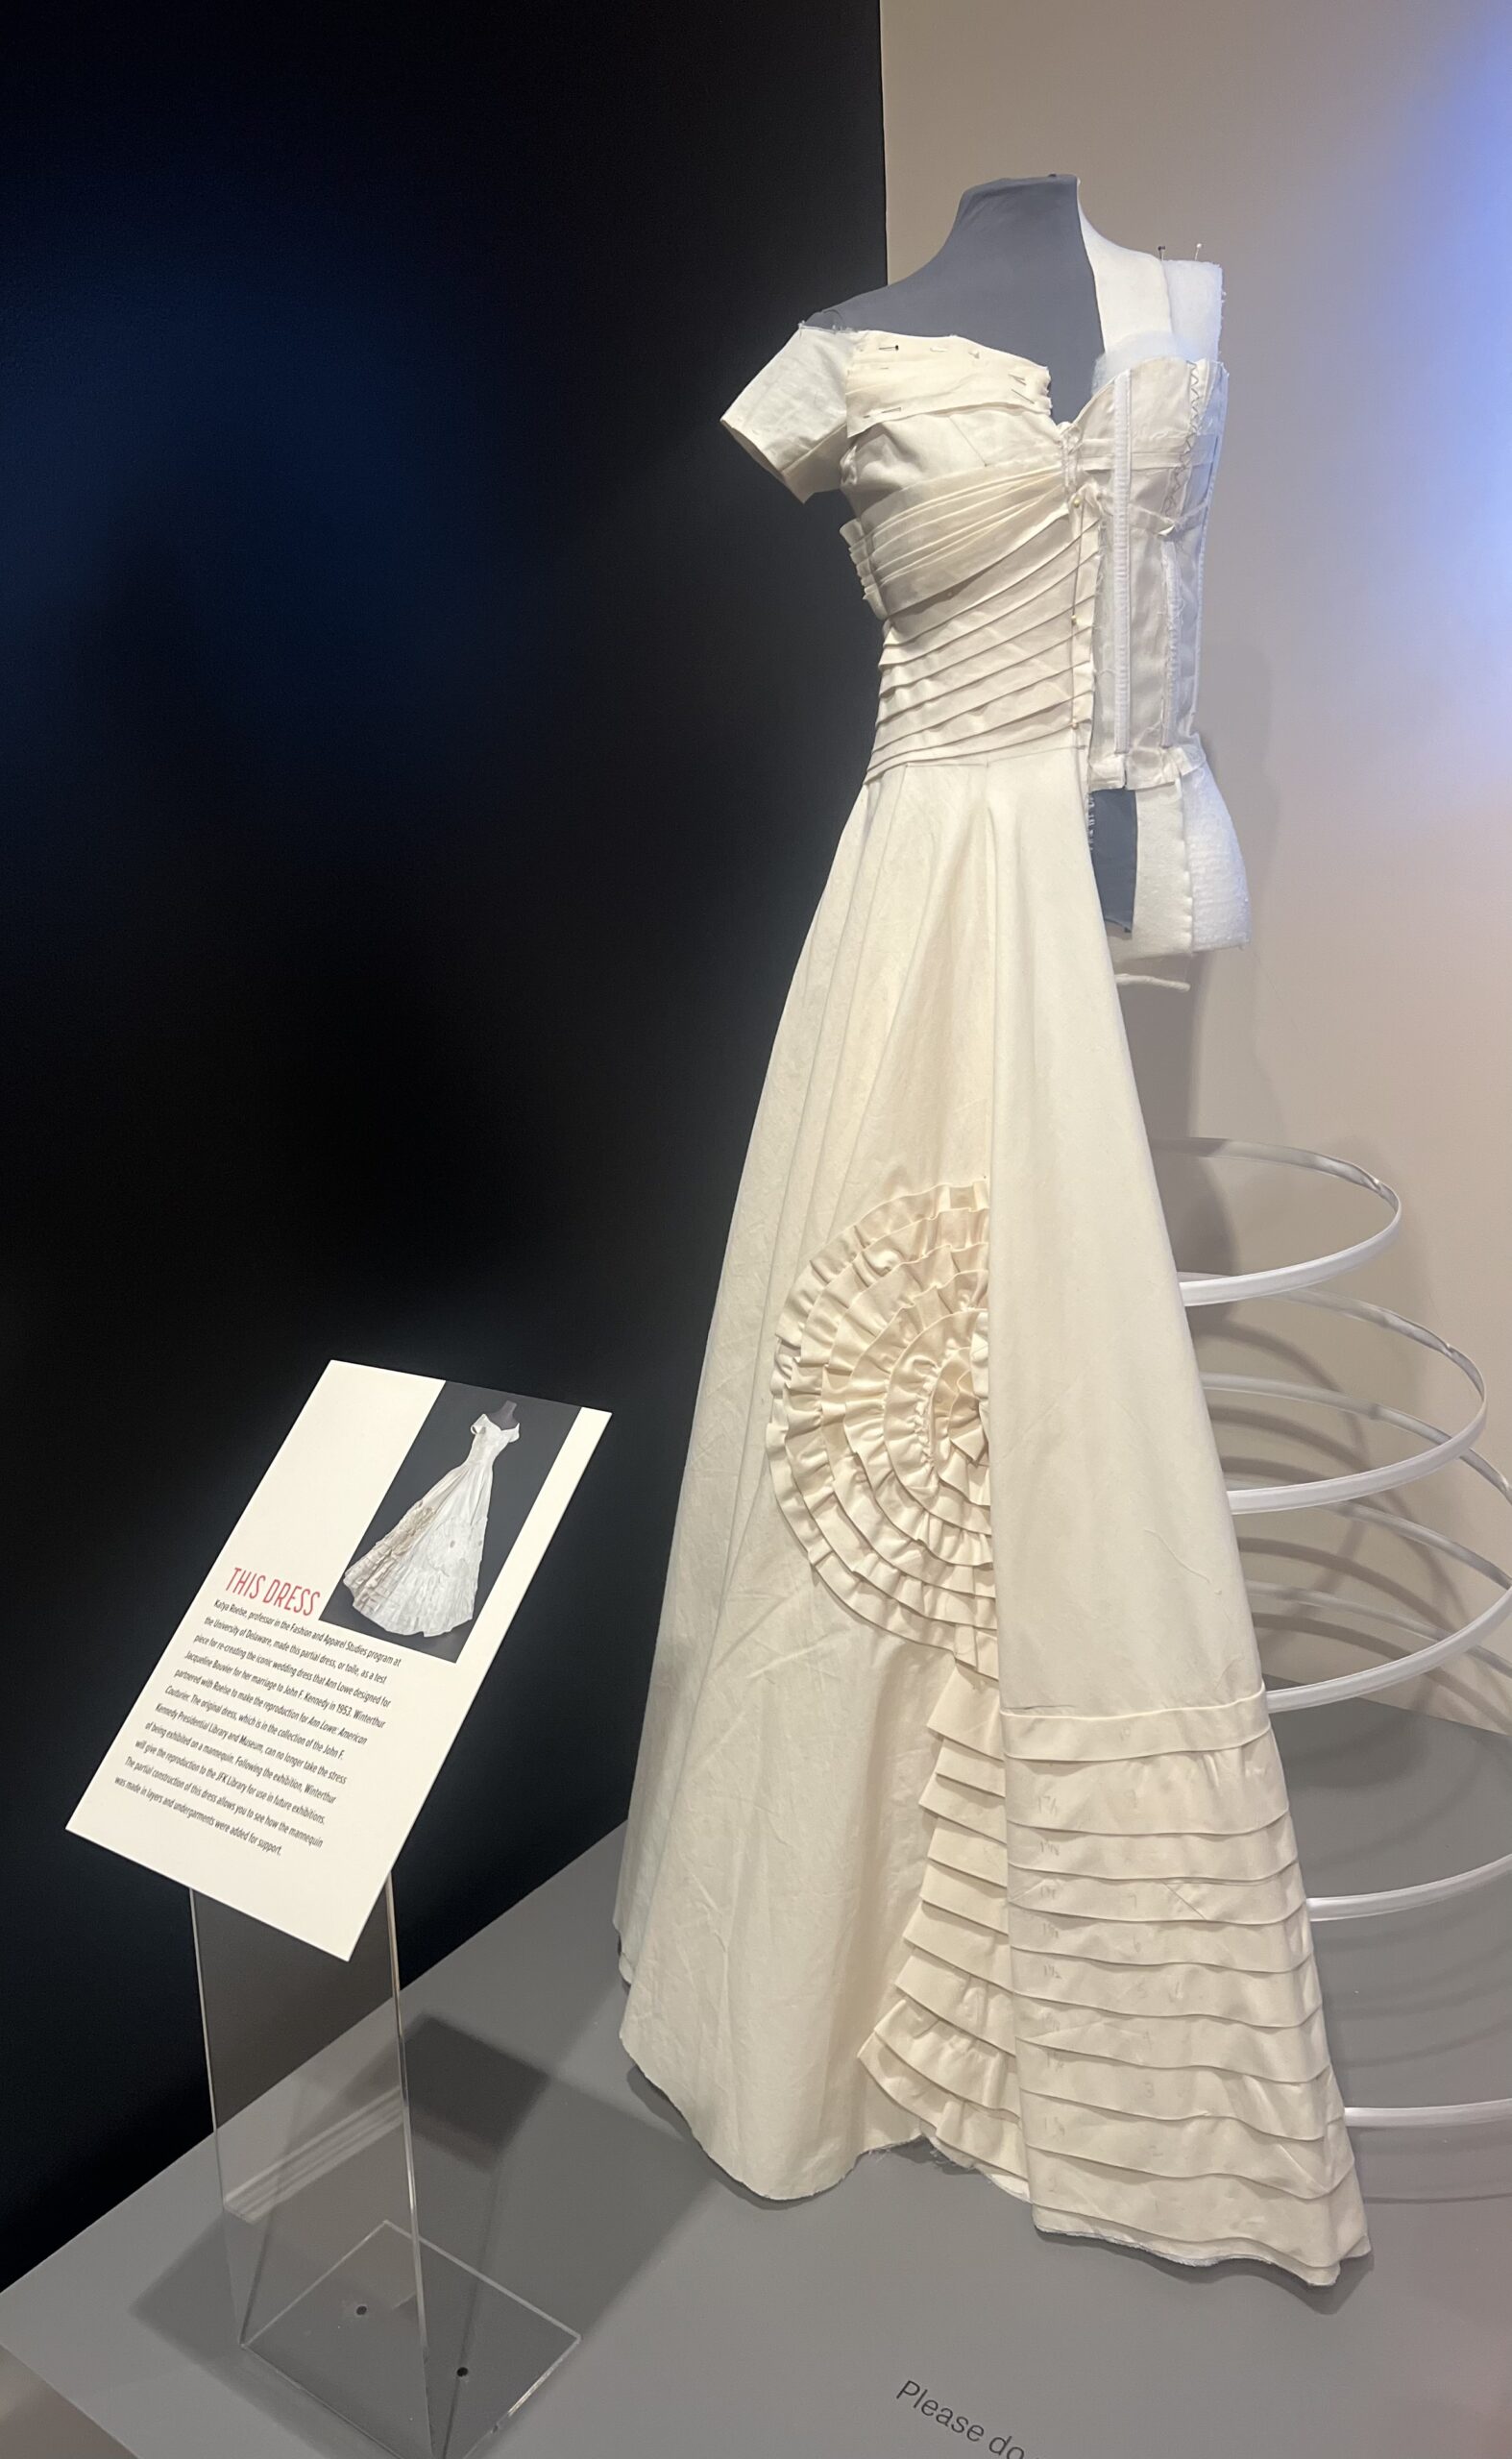 Katya Roelse, professor at the University of Delaware made this partial dress (Jackie Kennedy Wedding dress) on display at the Ann Lowe exhibit at Winterthur